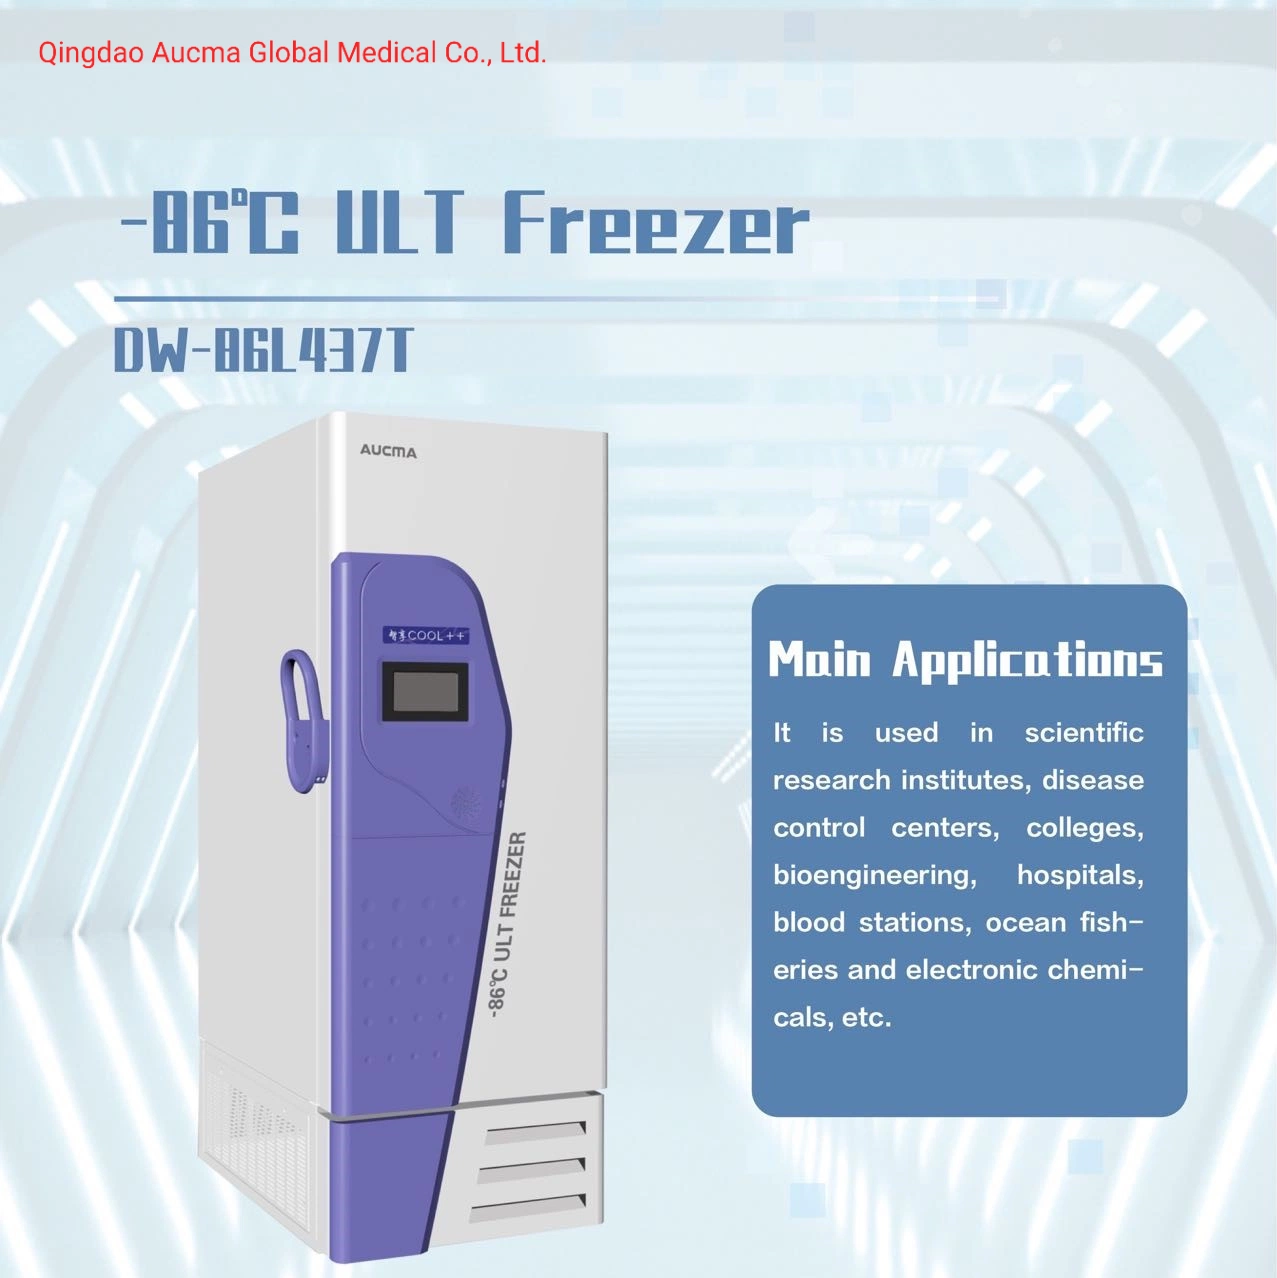 China CE Marked -86 Degree Pharmacy Laboratory Vaccine Medical Ultra Low Temperature Freezer Deep Refrigerator (DW-86L437T)